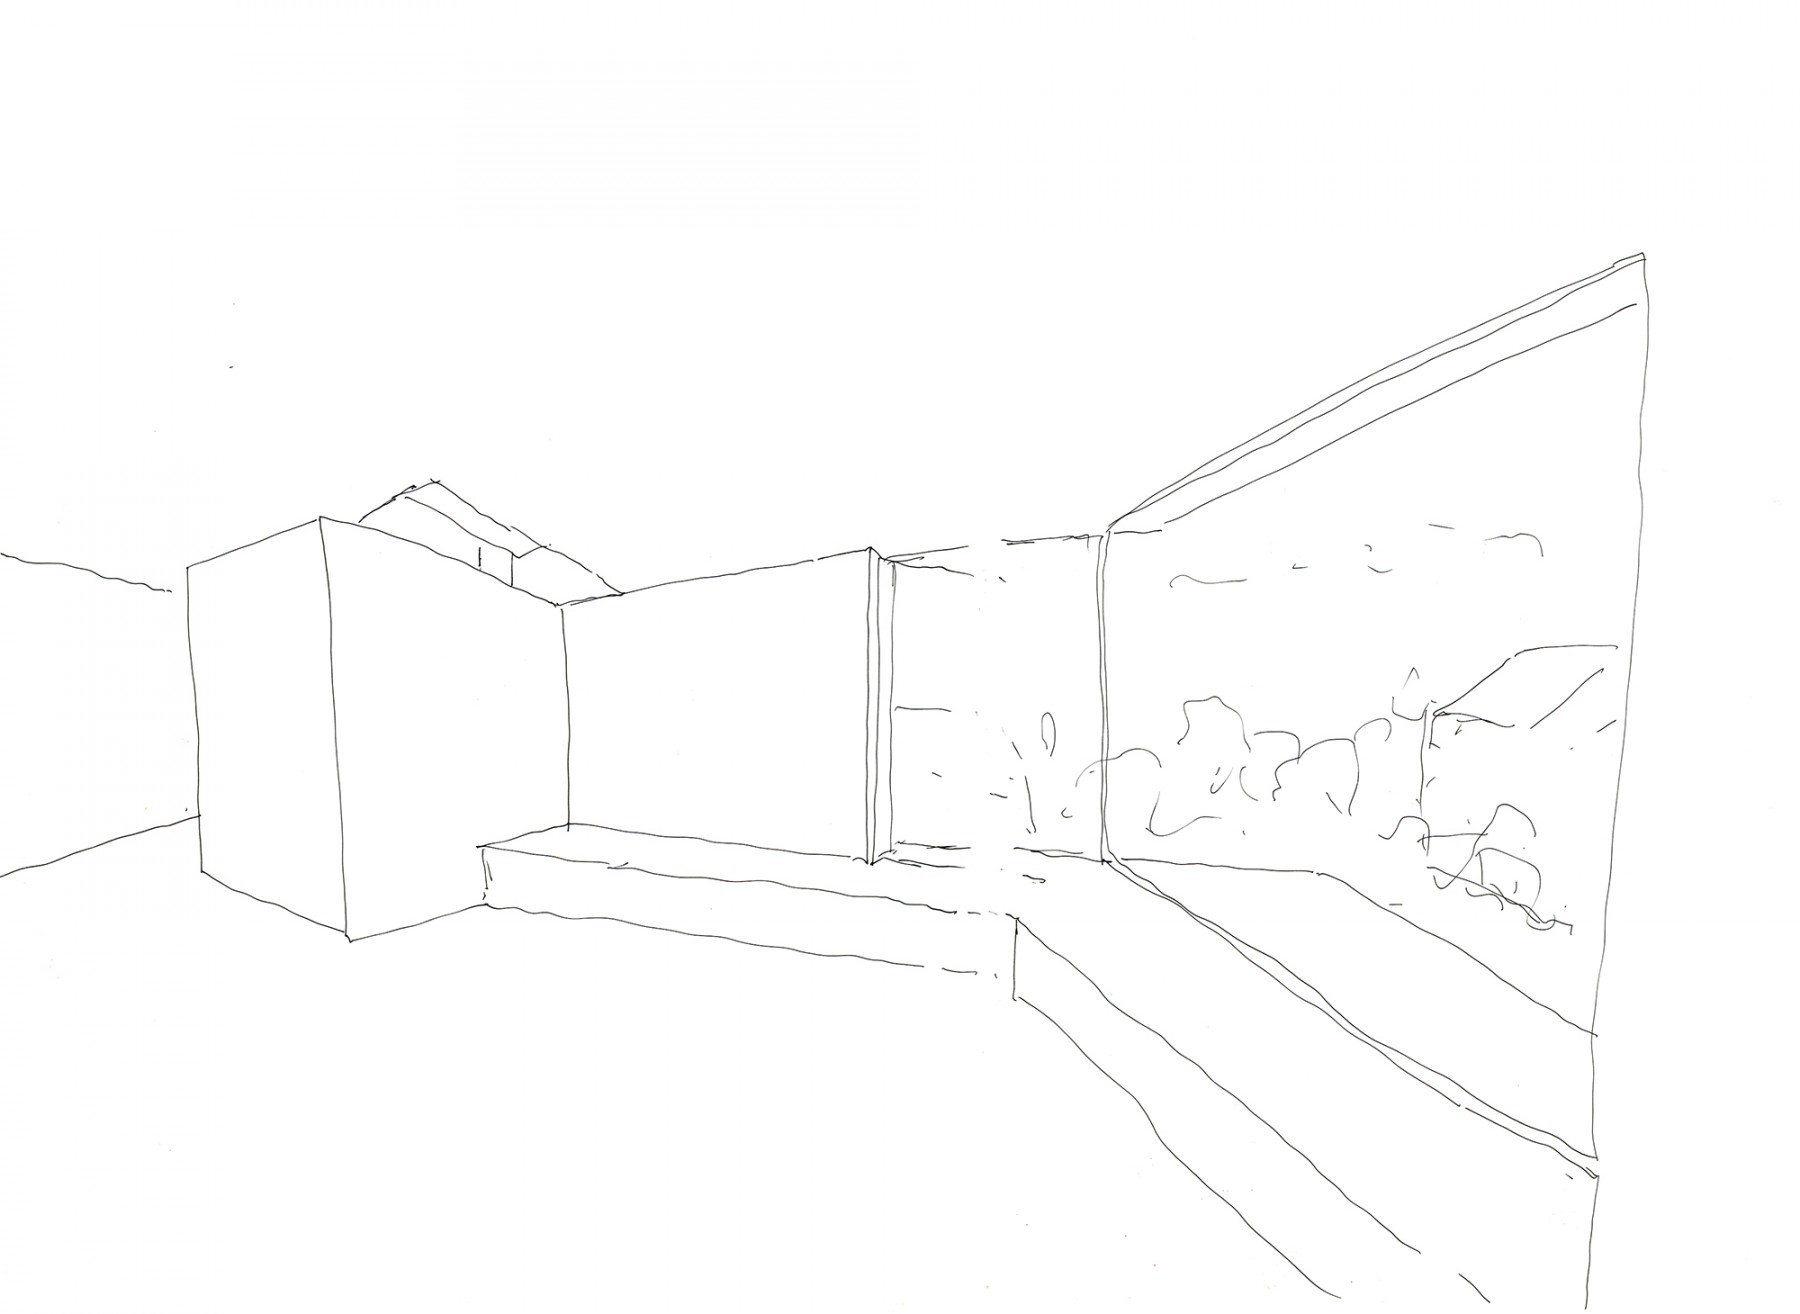 Jamie-Fobert-Architects-Grosz-House-Downshire-Hill-Sketches